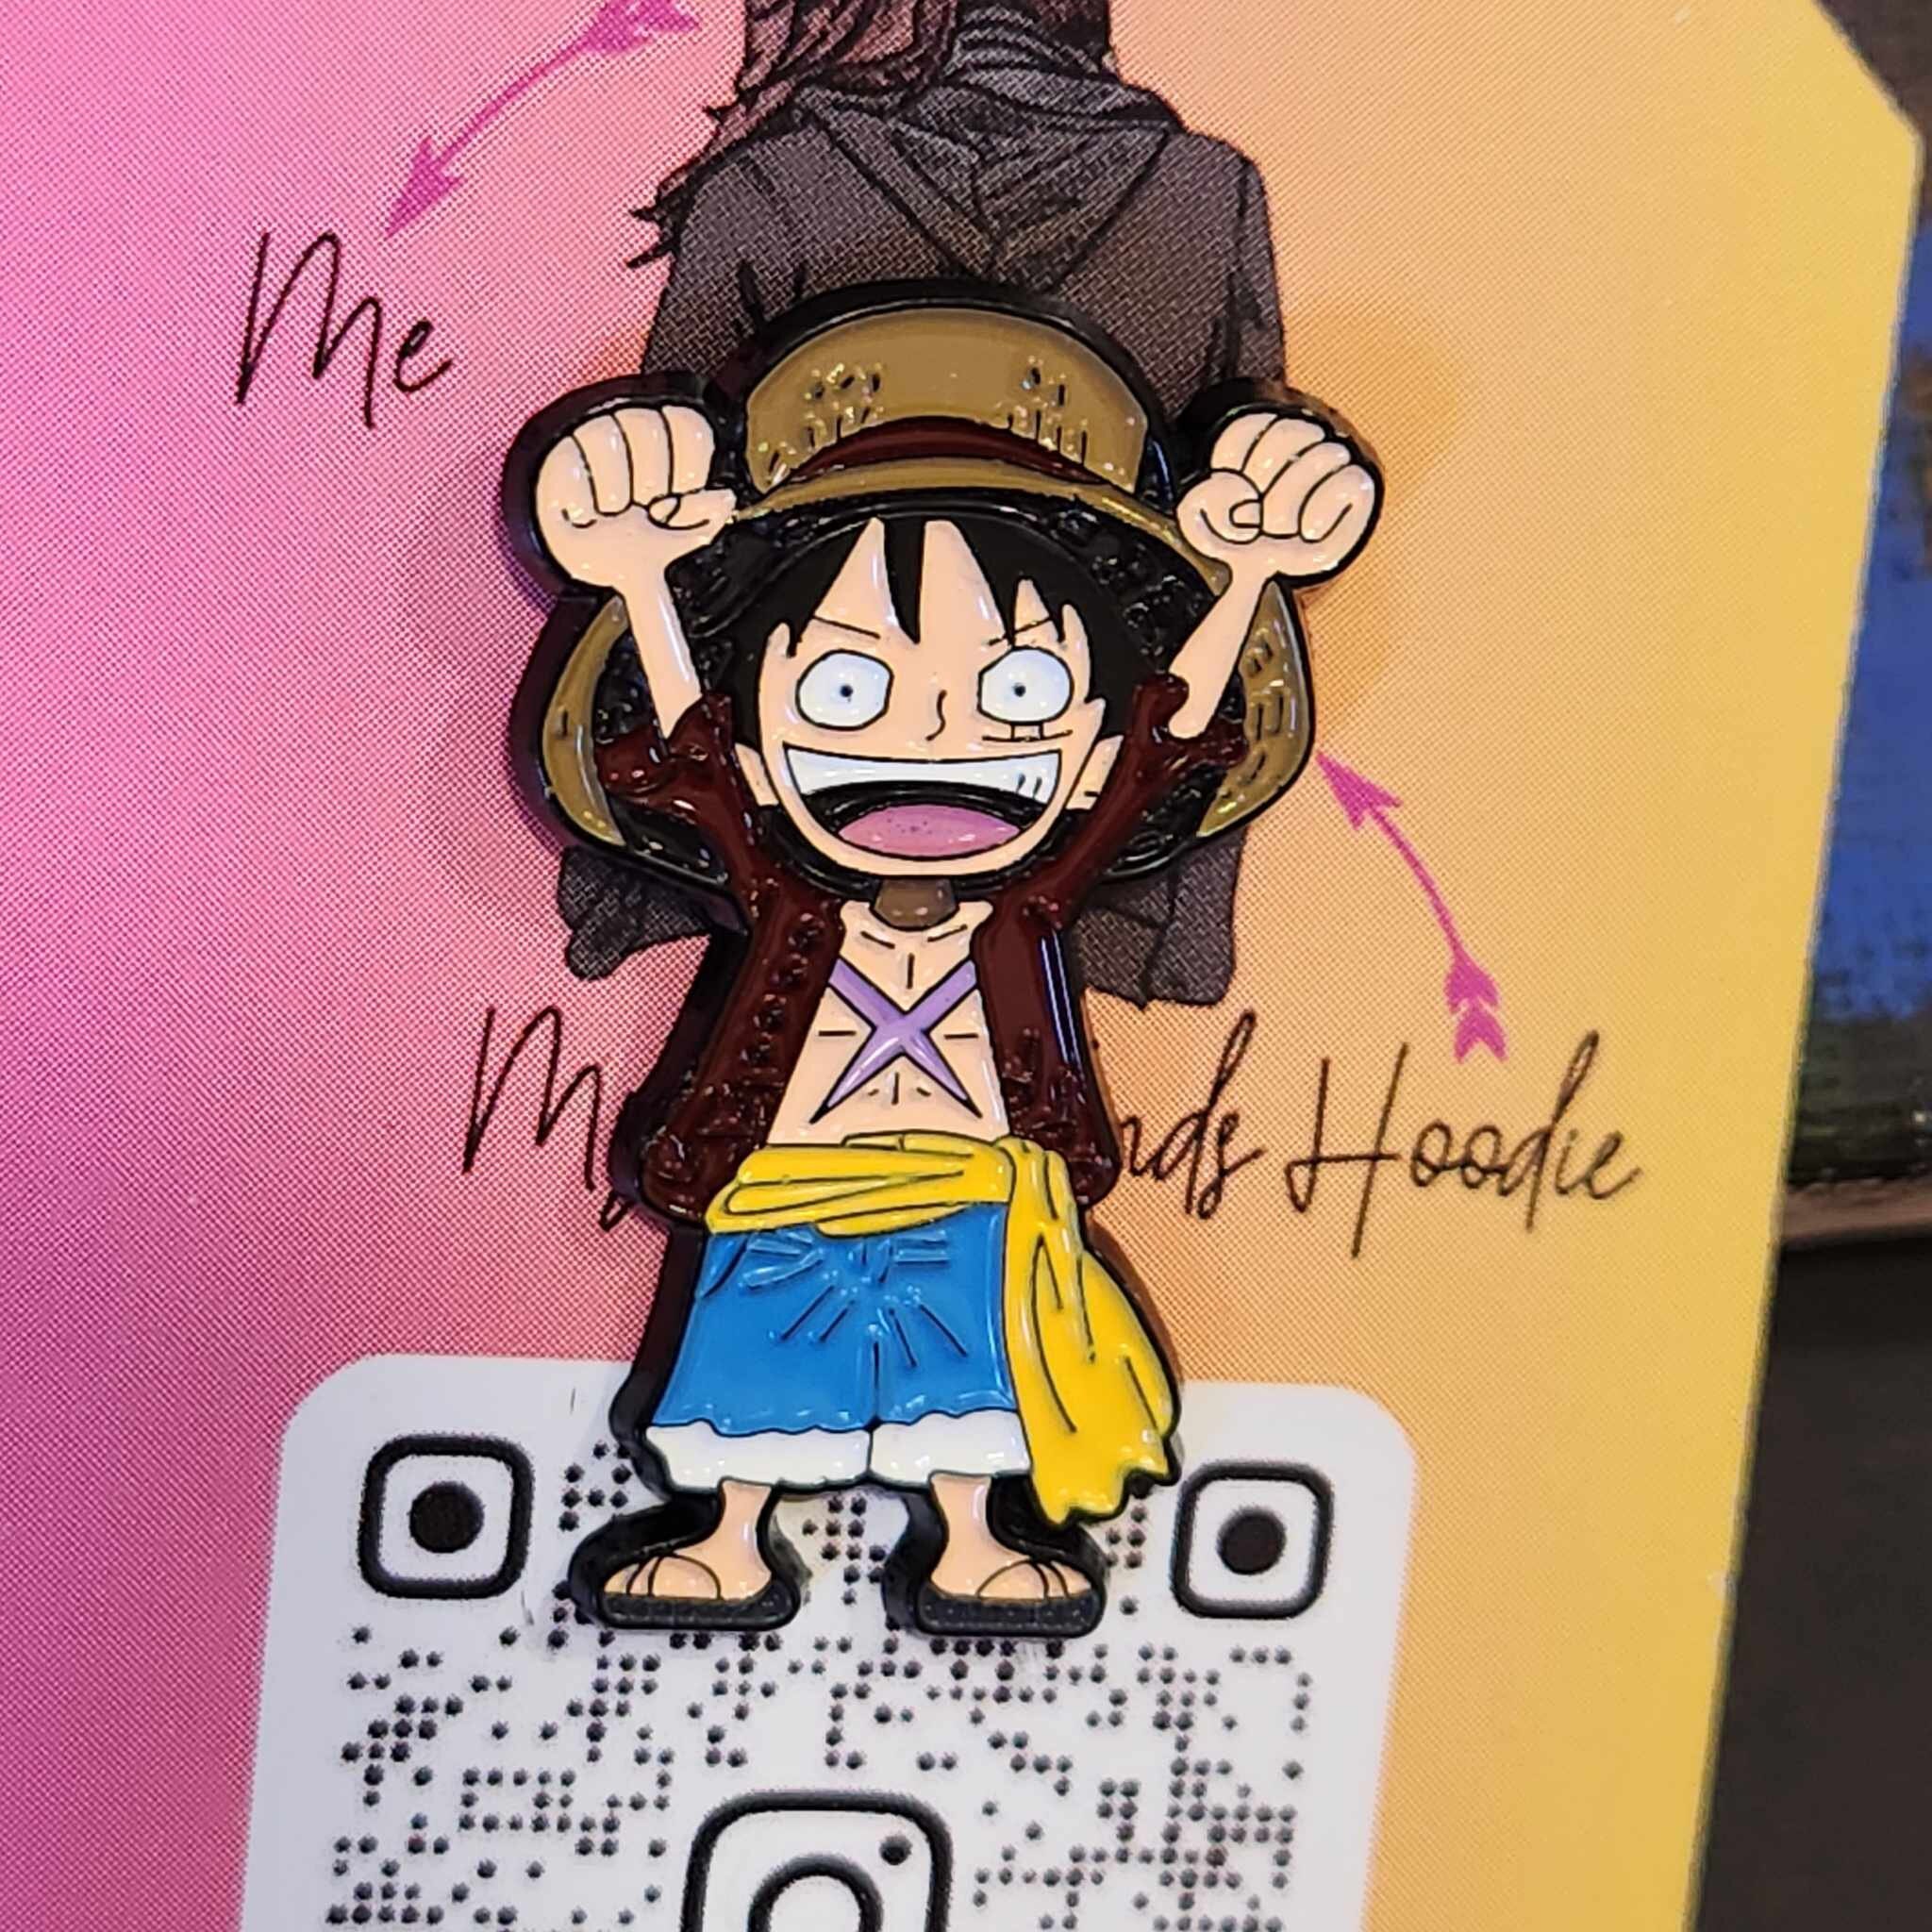 Luffy on the Going Merry - One Piece Pin for Sale by Joejo19